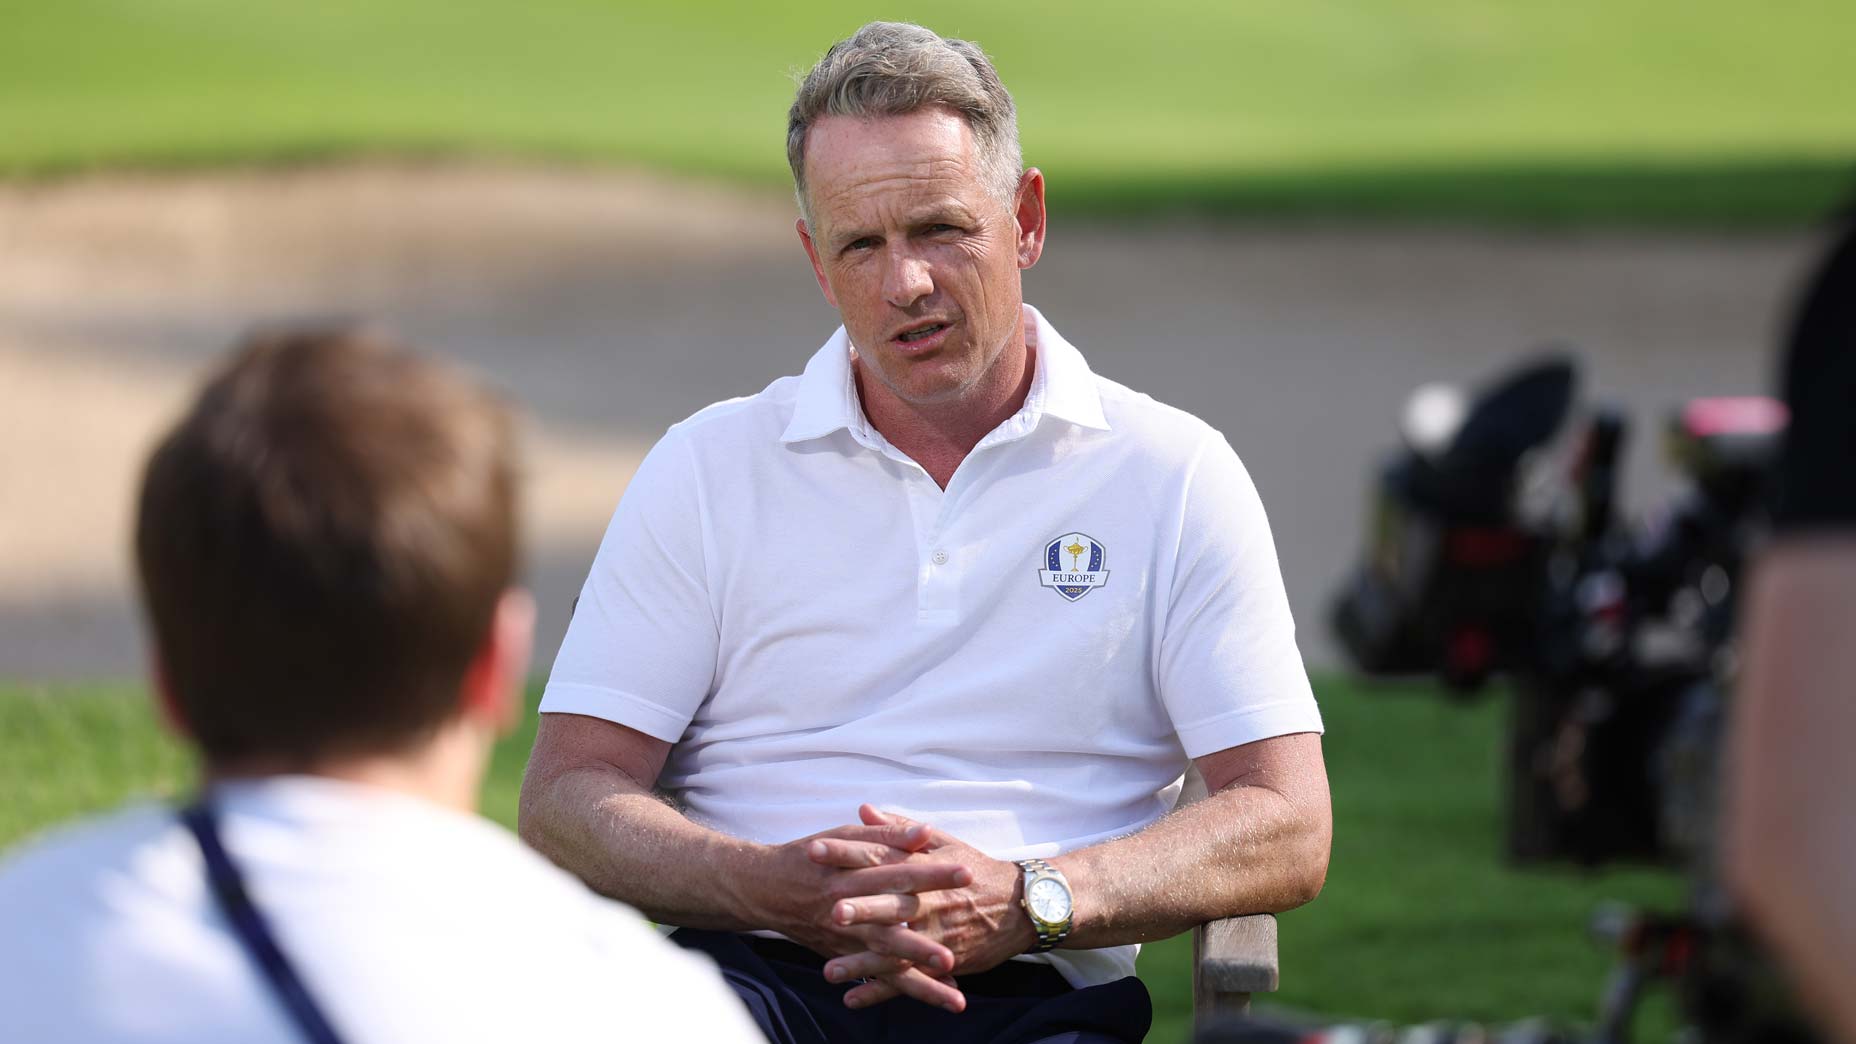 PGA Tour pro and Ryder Cup captain Luke Donald sits for interview at golf course